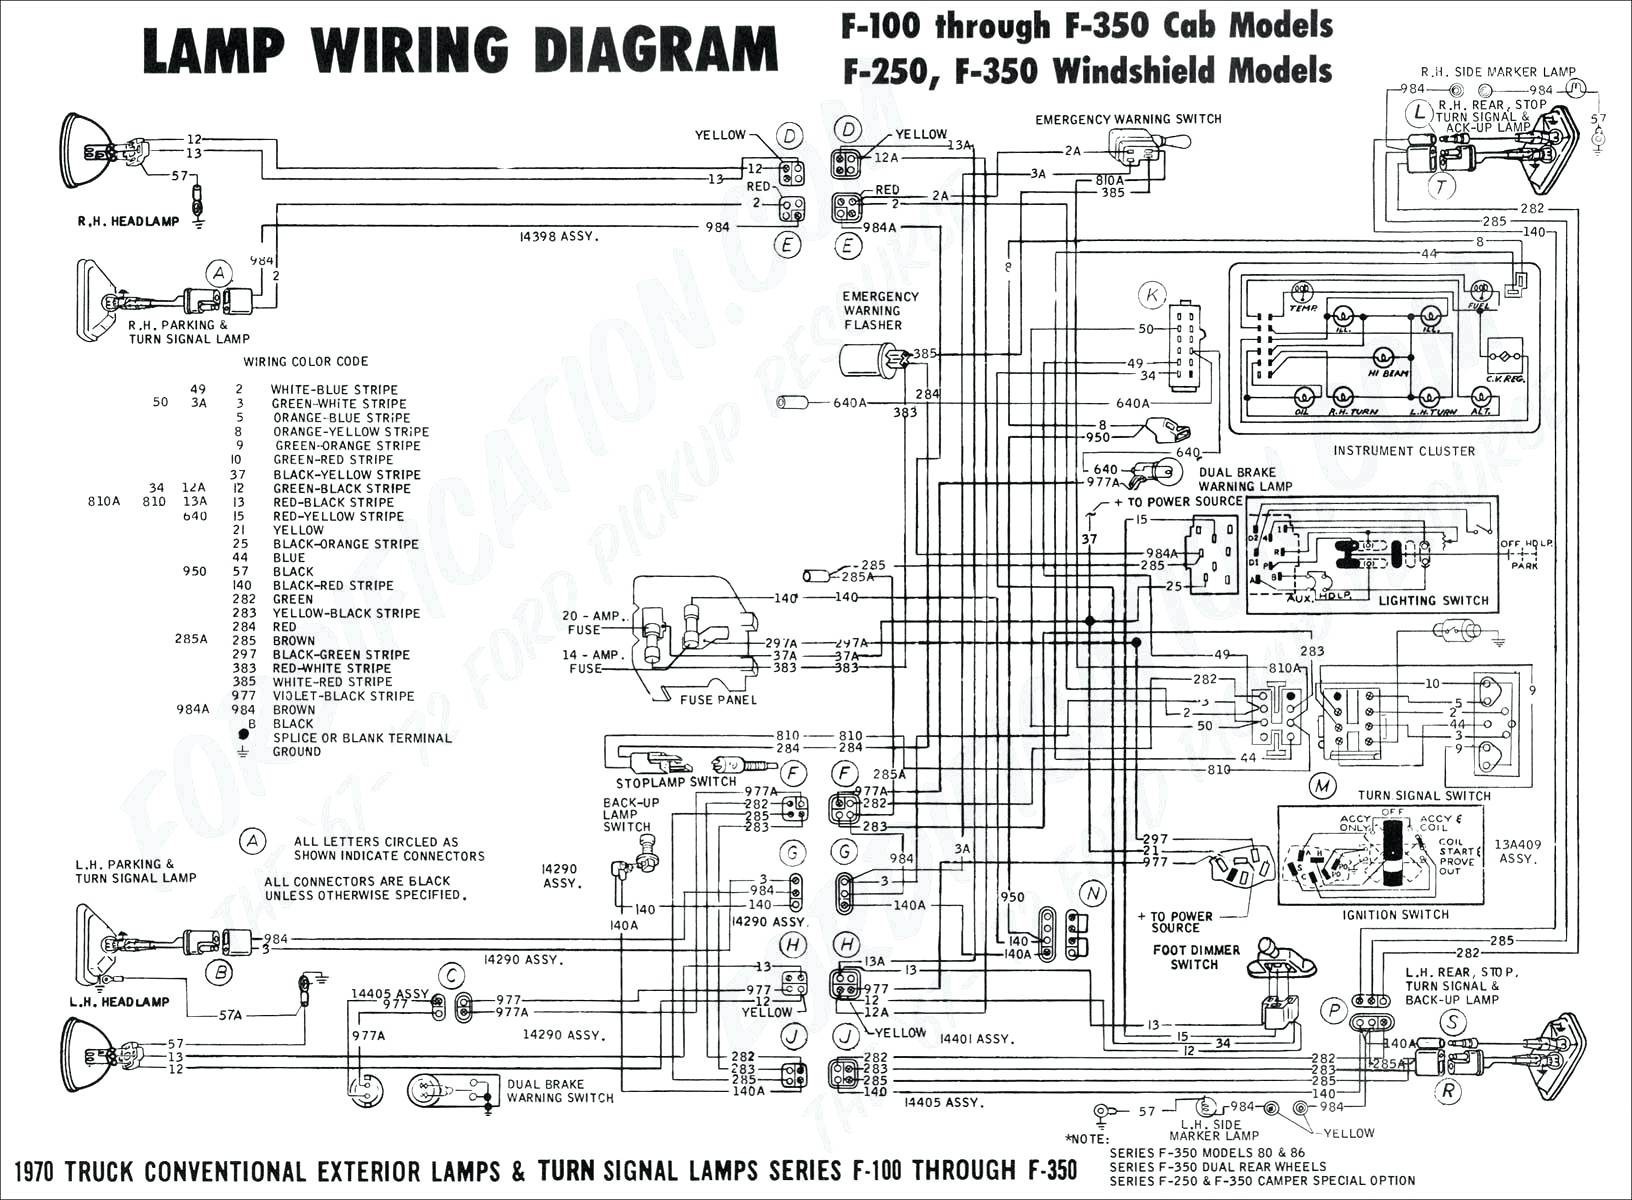 Travel Trailer Battery Wiring Diagram Reference Heartland Rv Wiring Diagram Image